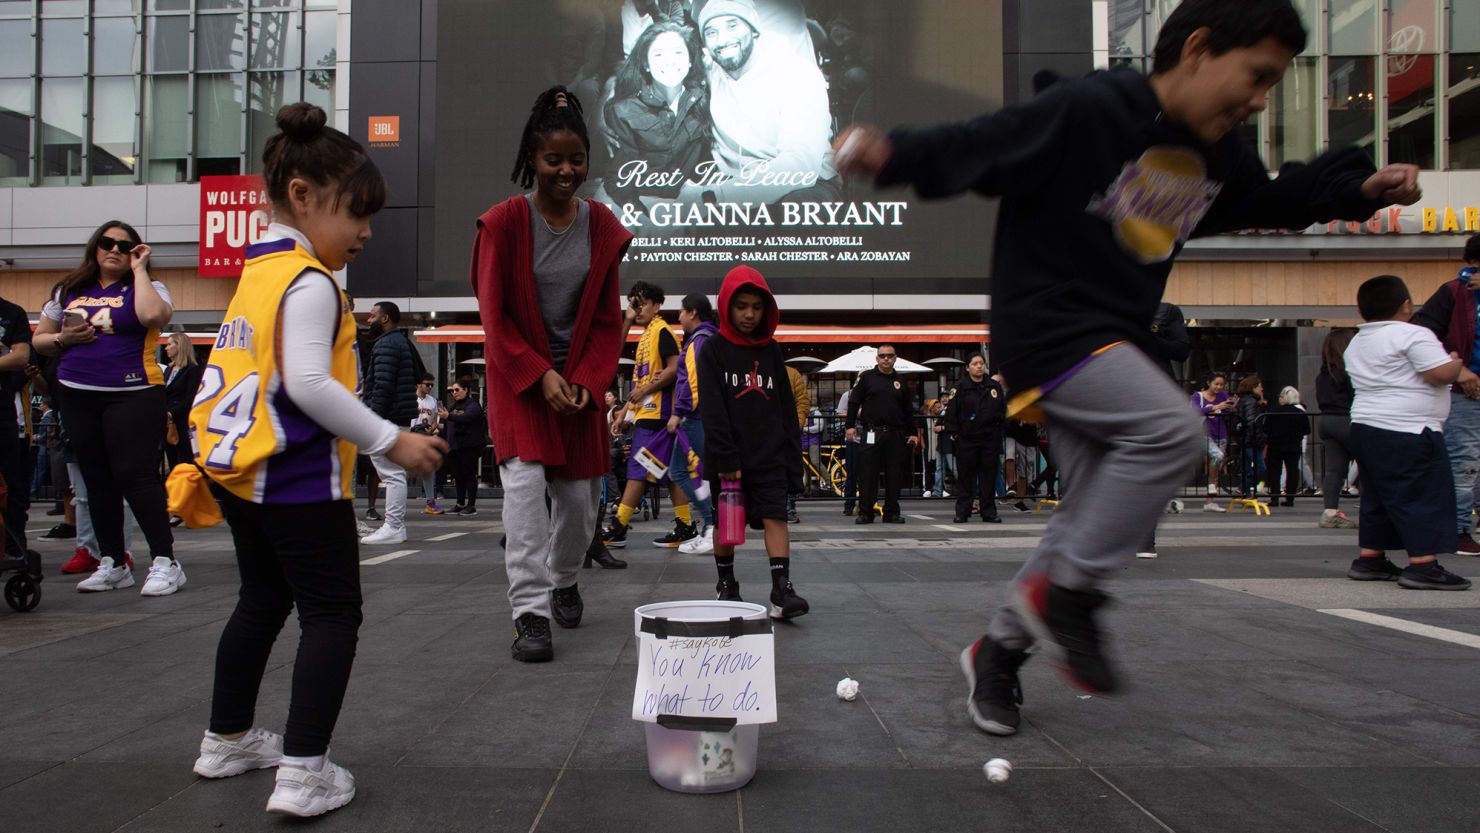 Children plays basket with paper balls in a trash can in front of a makeshit memorial for former NBA and Los Angeles Lakers player Kobe Bryant and his daughter Gianna Bryant, at LA Live plaza in front of Staples Center in Los Angeles on January 27, 2020. 